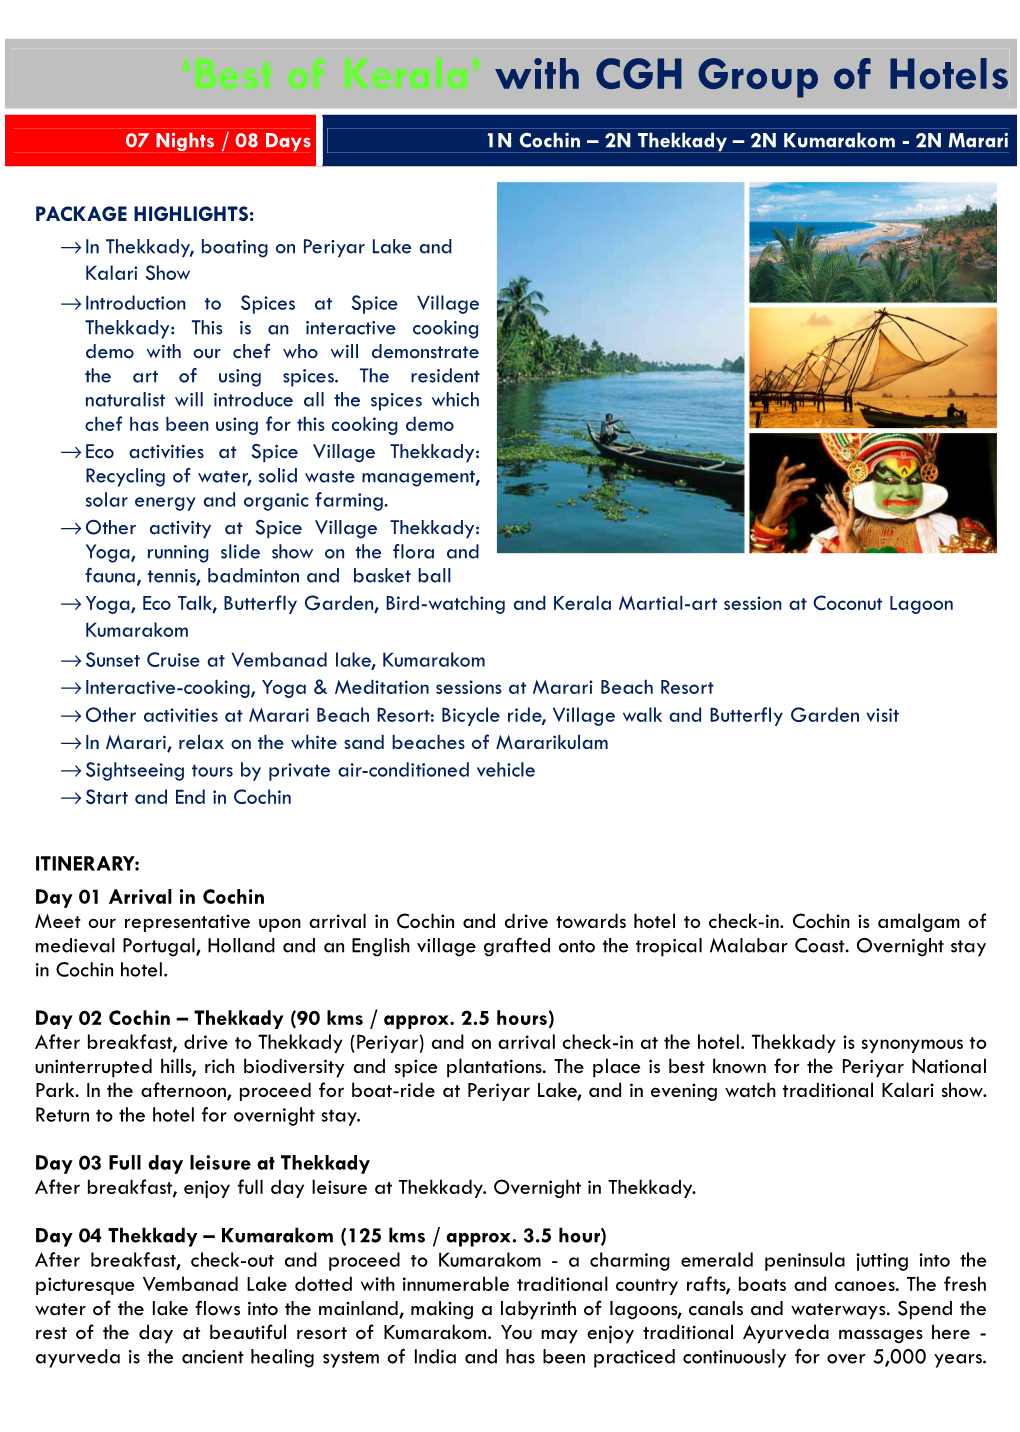 'Best of Kerala' with CGH Group of Hotels